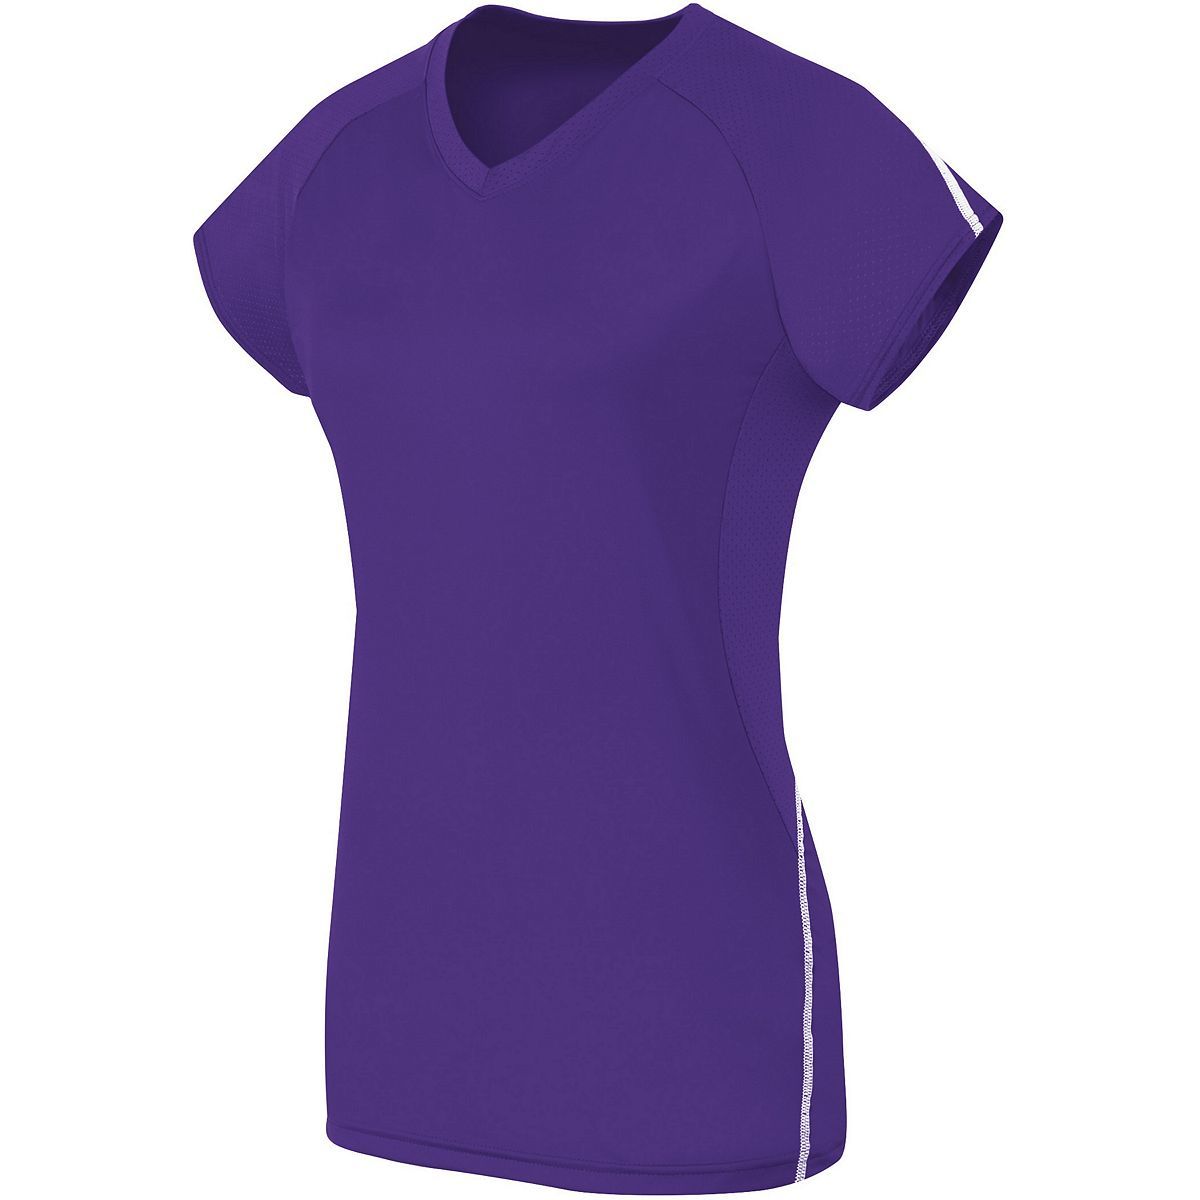 High 5 Girls Short Sleeve Solid Jersey in Purple/White  -Part of the Girls, High5-Products, Volleyball, Girls-Jersey, Shirts product lines at KanaleyCreations.com